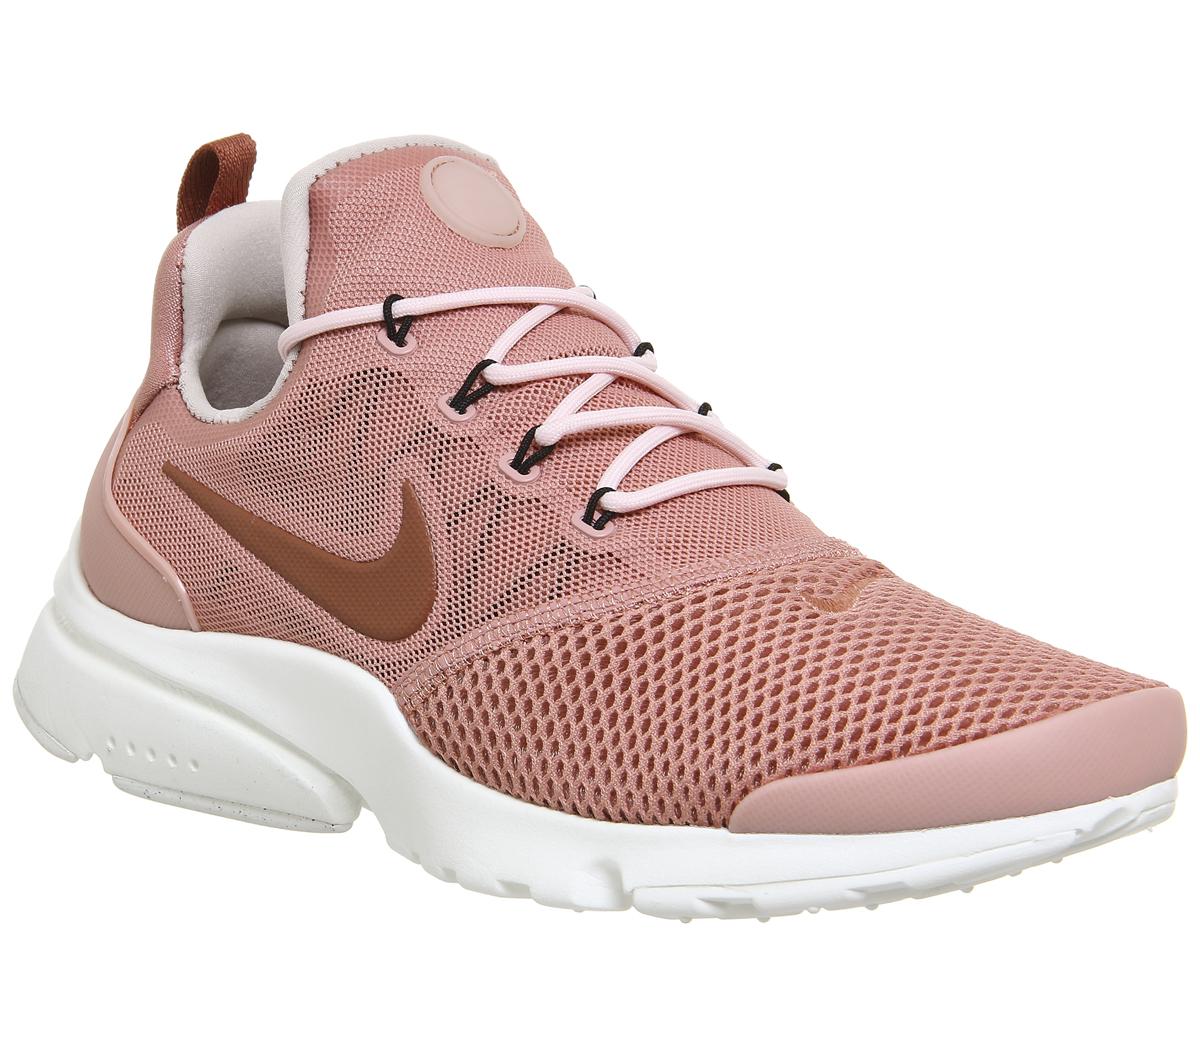 Nike Presto Fly Trainers Stardust Pink 